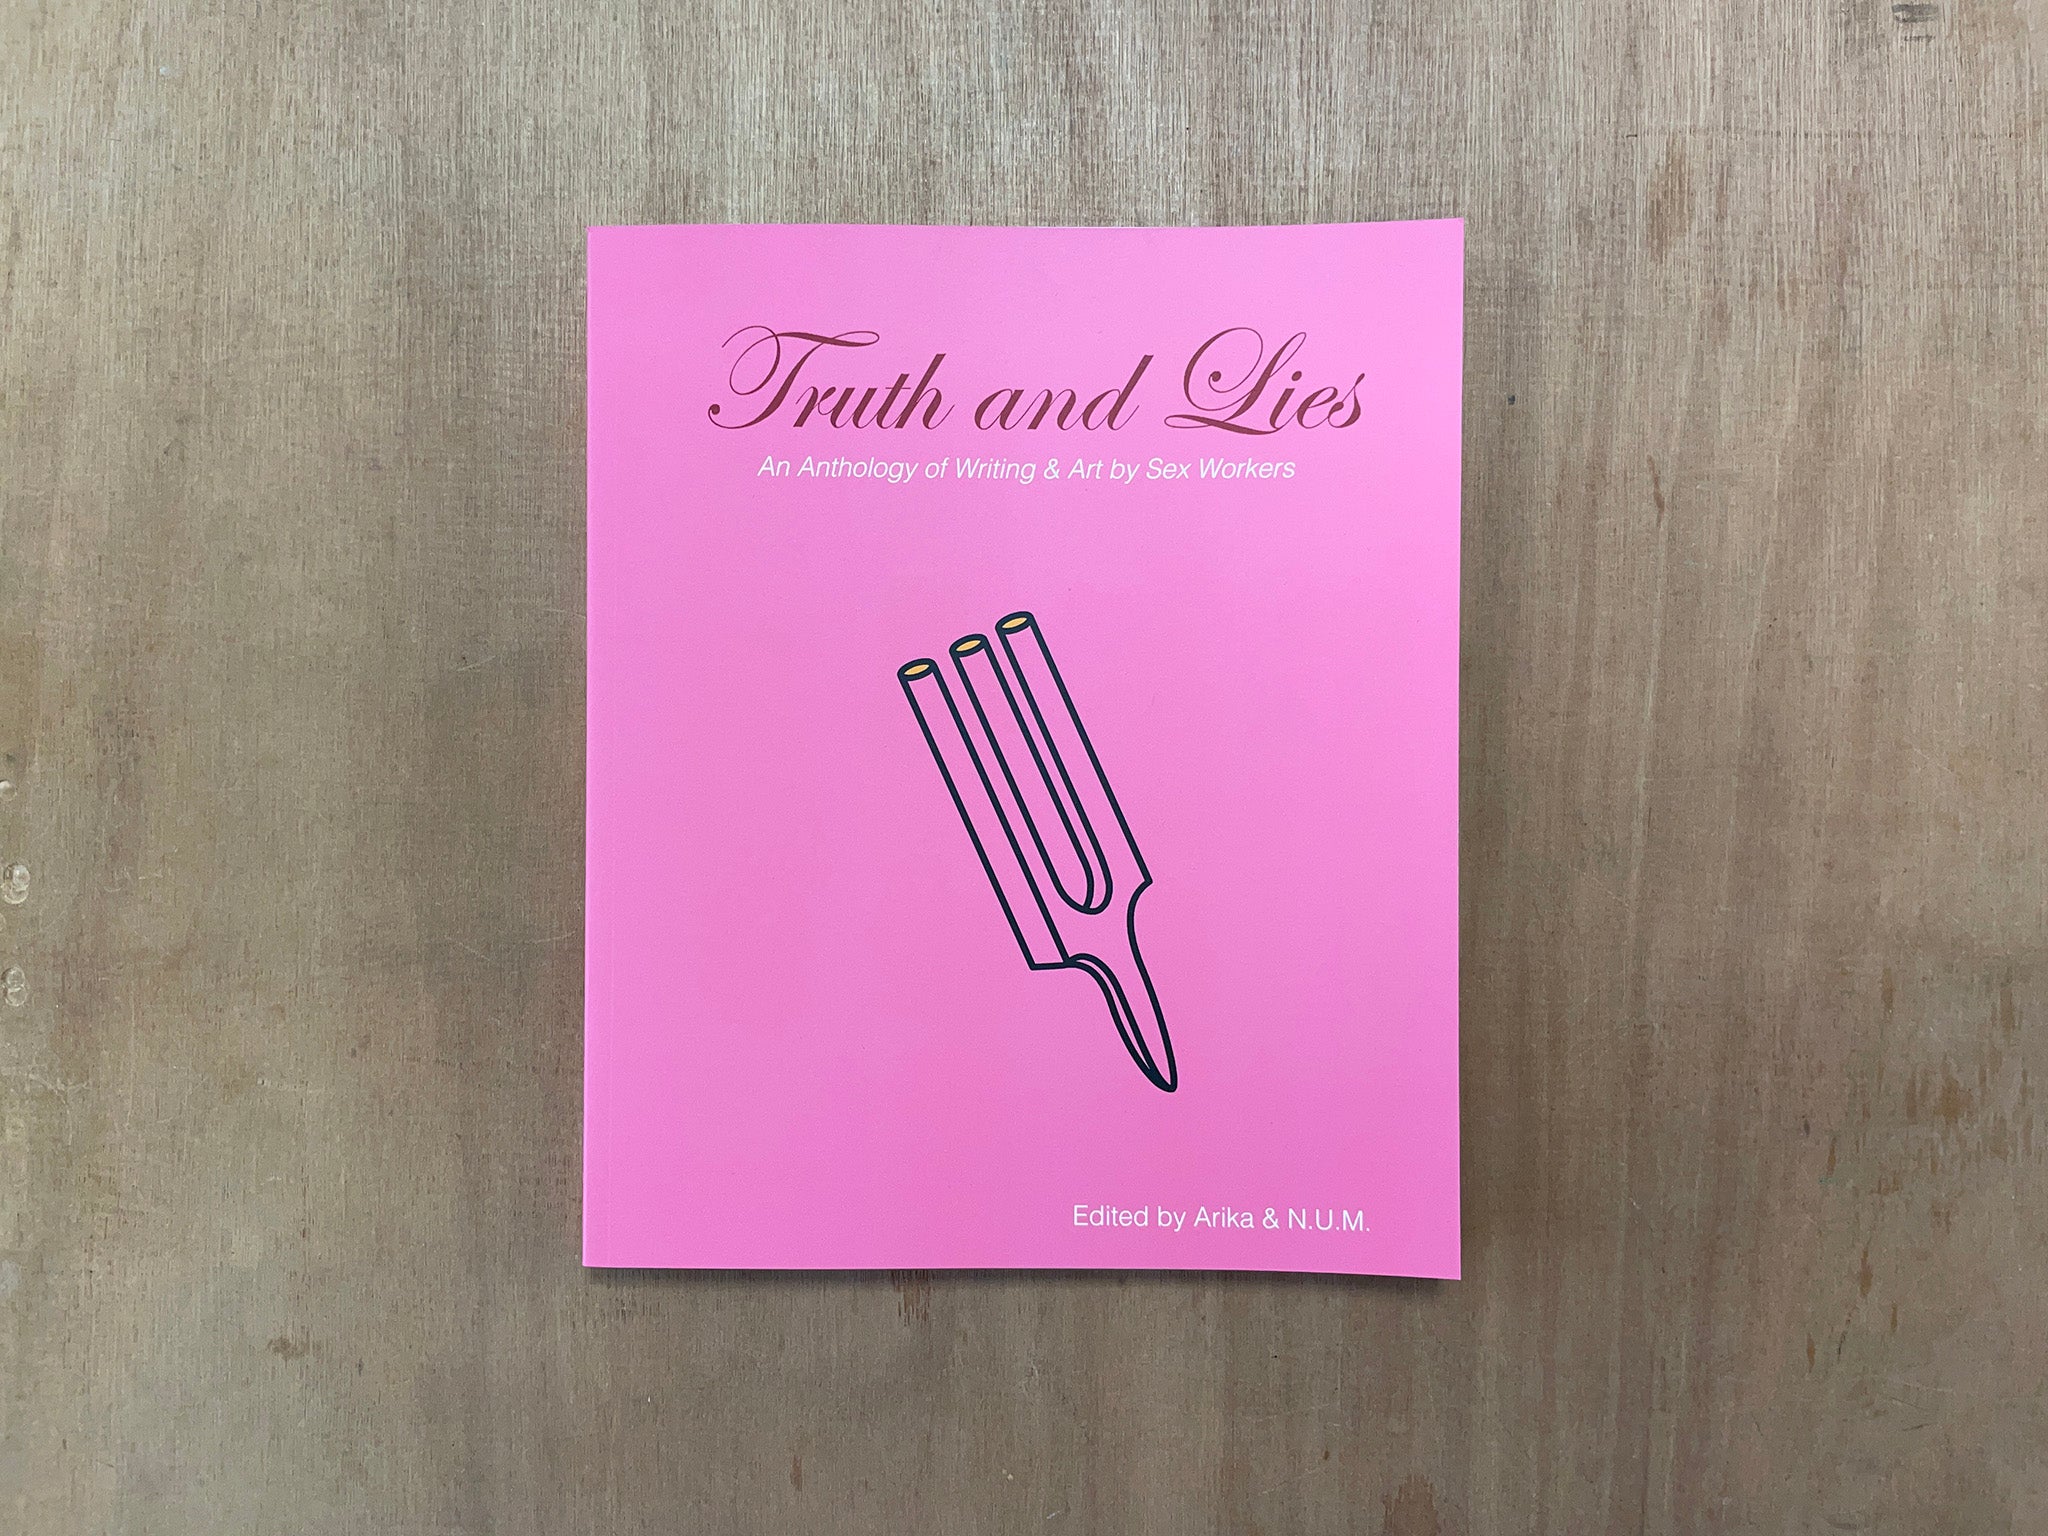 TRUTH AND LIES: AN ANTHOLOGY OF WRITING & ART BY SEX WORKERS Edited by Arika & N.U.M.